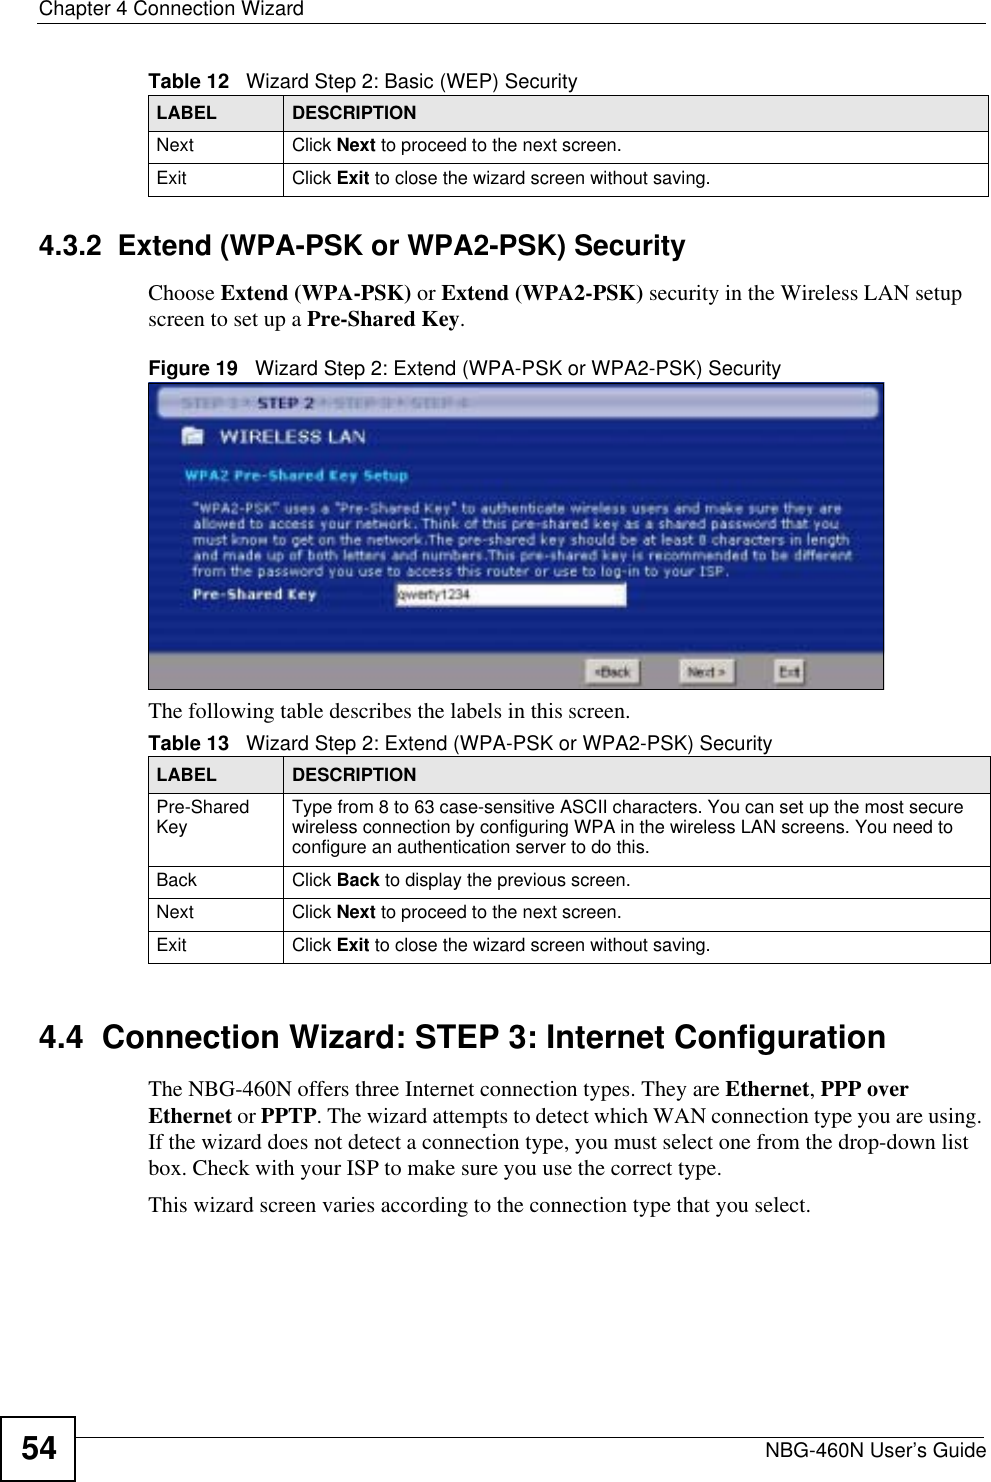 Chapter 4 Connection WizardNBG-460N User’s Guide544.3.2  Extend (WPA-PSK or WPA2-PSK) SecurityChoose Extend (WPA-PSK) or Extend (WPA2-PSK) security in the Wireless LAN setup screen to set up a Pre-Shared Key.Figure 19   Wizard Step 2: Extend (WPA-PSK or WPA2-PSK) SecurityThe following table describes the labels in this screen. 4.4  Connection Wizard: STEP 3: Internet ConfigurationThe NBG-460N offers three Internet connection types. They are Ethernet,PPP over Ethernet or PPTP. The wizard attempts to detect which WAN connection type you are using. If the wizard does not detect a connection type, you must select one from the drop-down list box. Check with your ISP to make sure you use the correct type.This wizard screen varies according to the connection type that you select.Next Click Next to proceed to the next screen. Exit Click Exit to close the wizard screen without saving.Table 12   Wizard Step 2: Basic (WEP) SecurityLABEL DESCRIPTIONTable 13   Wizard Step 2: Extend (WPA-PSK or WPA2-PSK) SecurityLABEL DESCRIPTIONPre-Shared Key Type from 8 to 63 case-sensitive ASCII characters. You can set up the most secure wireless connection by configuring WPA in the wireless LAN screens. You need to configure an authentication server to do this.Back Click Back to display the previous screen.Next Click Next to proceed to the next screen. Exit Click Exit to close the wizard screen without saving.